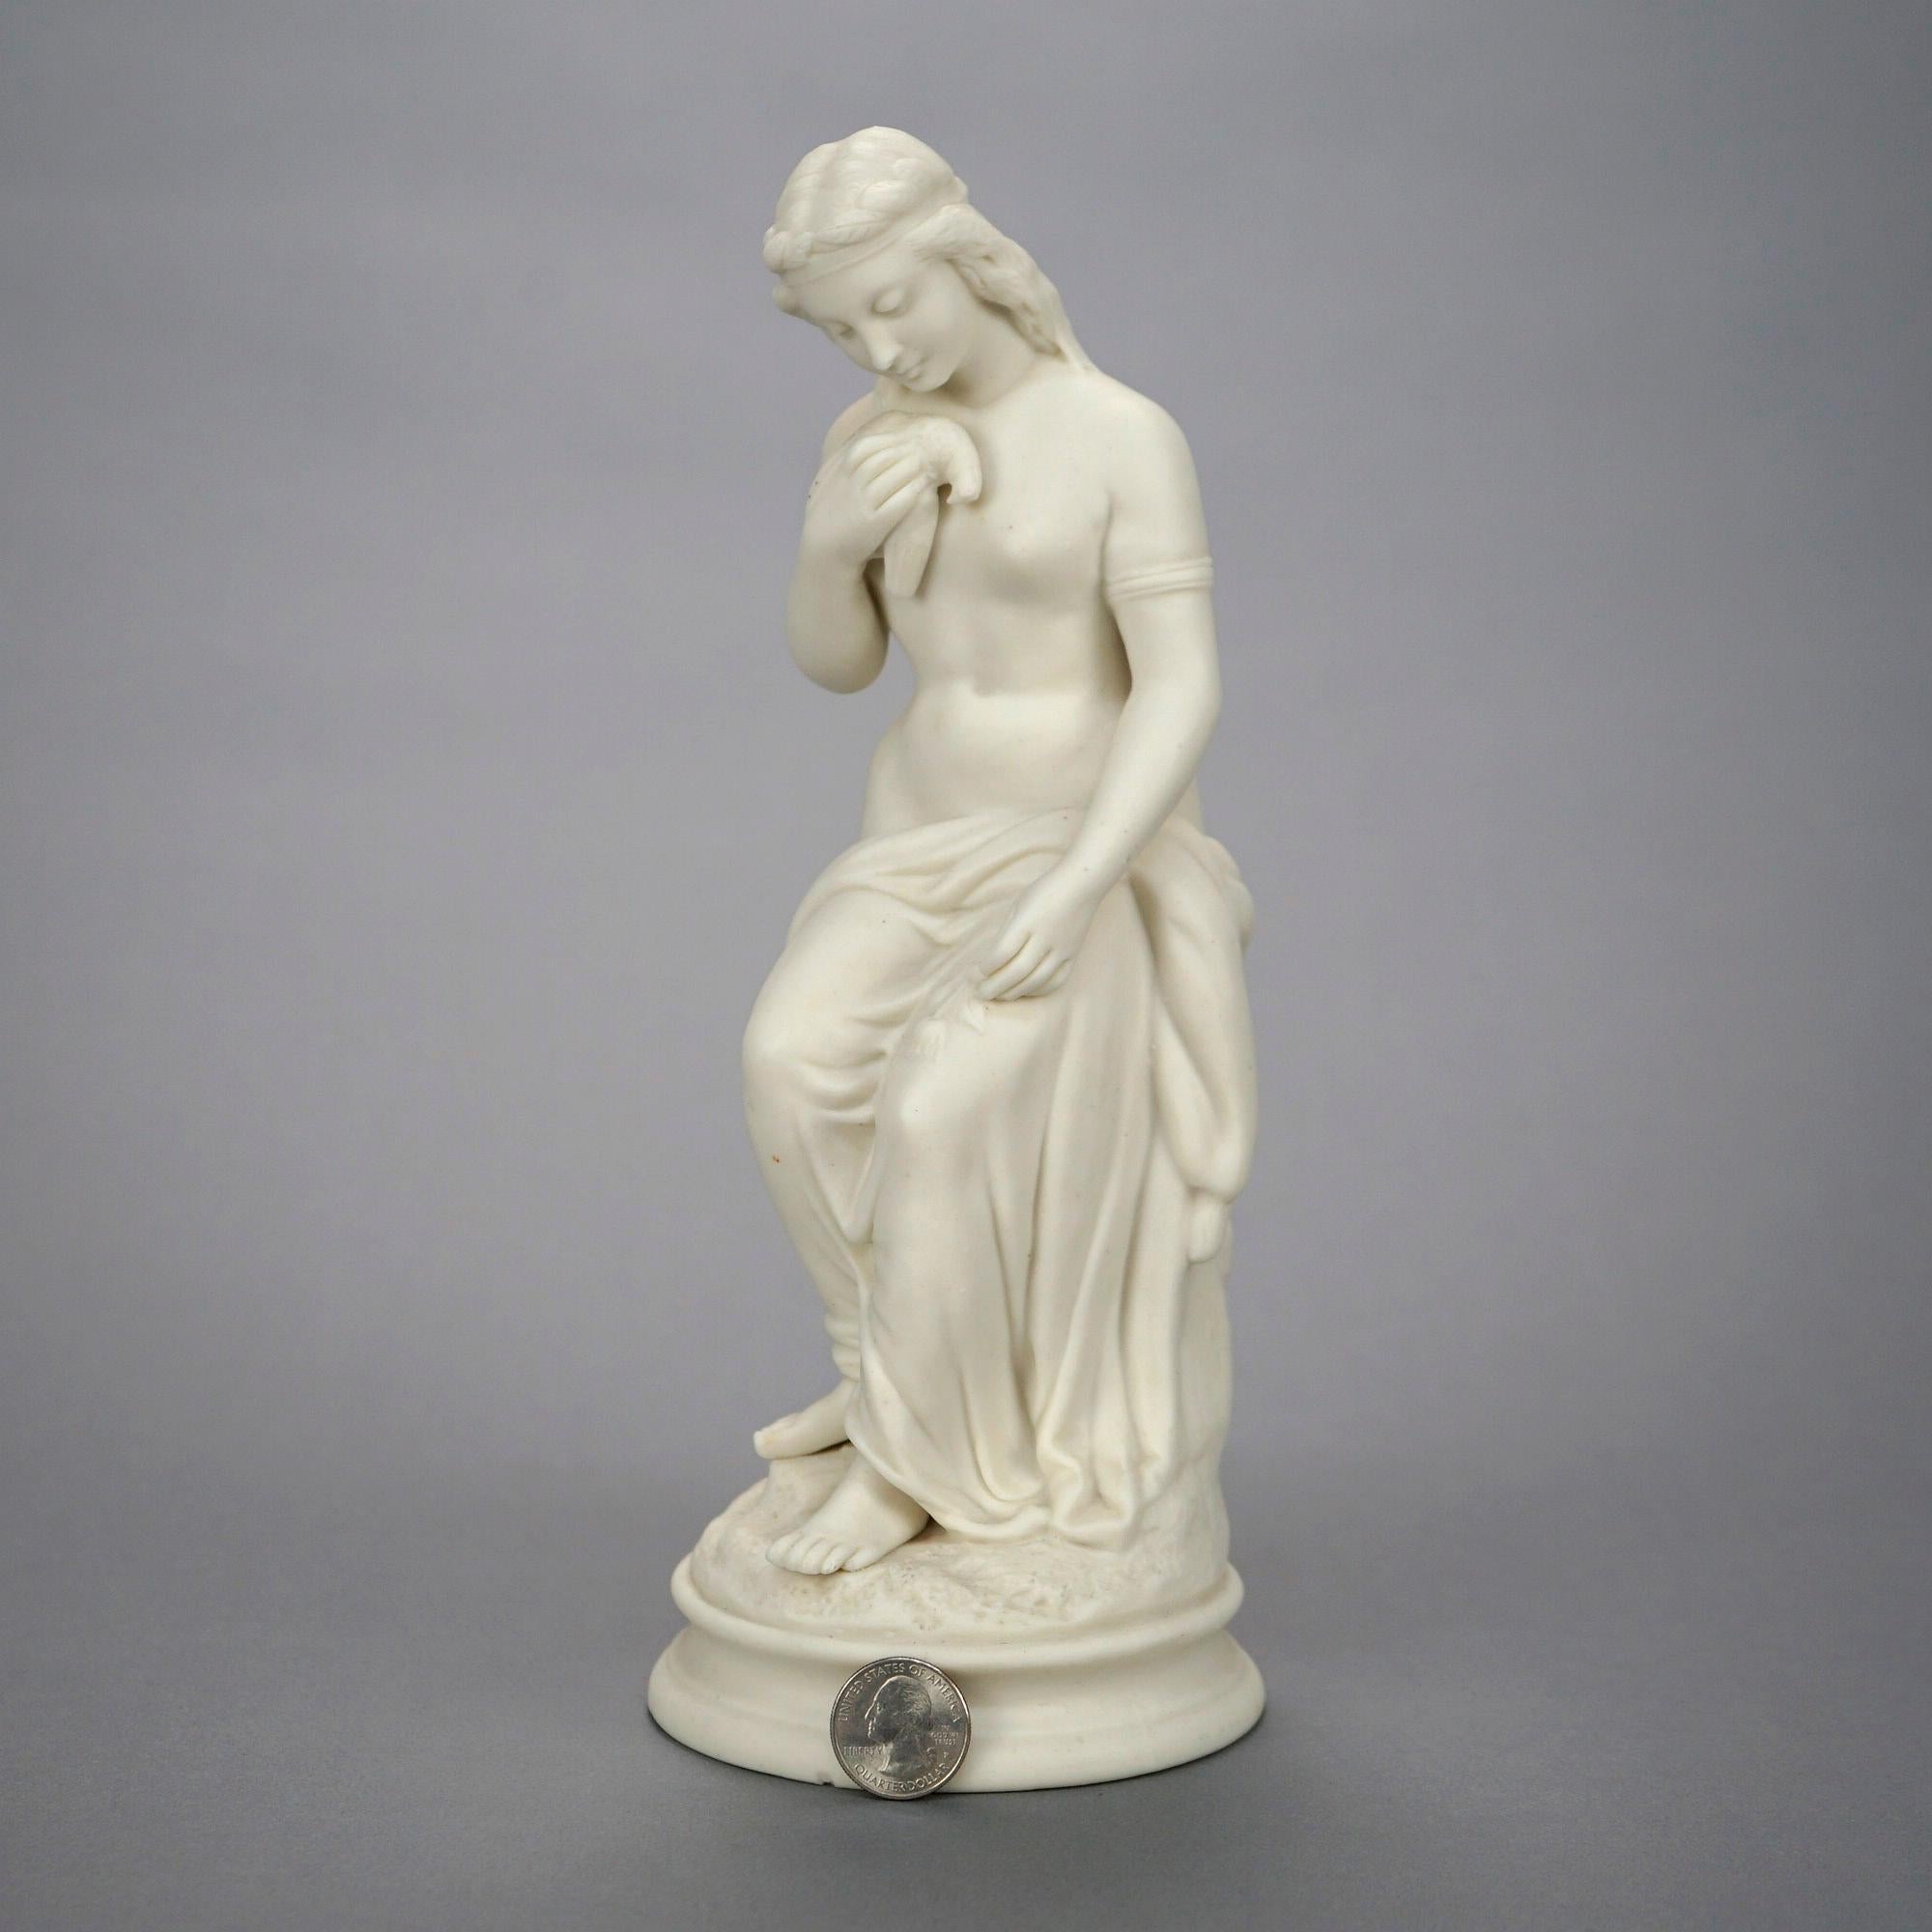 An antique parian porcelain statue offers portrait of a seated Classical woman and a dove, 19th century

Measures- 11''H x 4.25''W x 4.25''D.